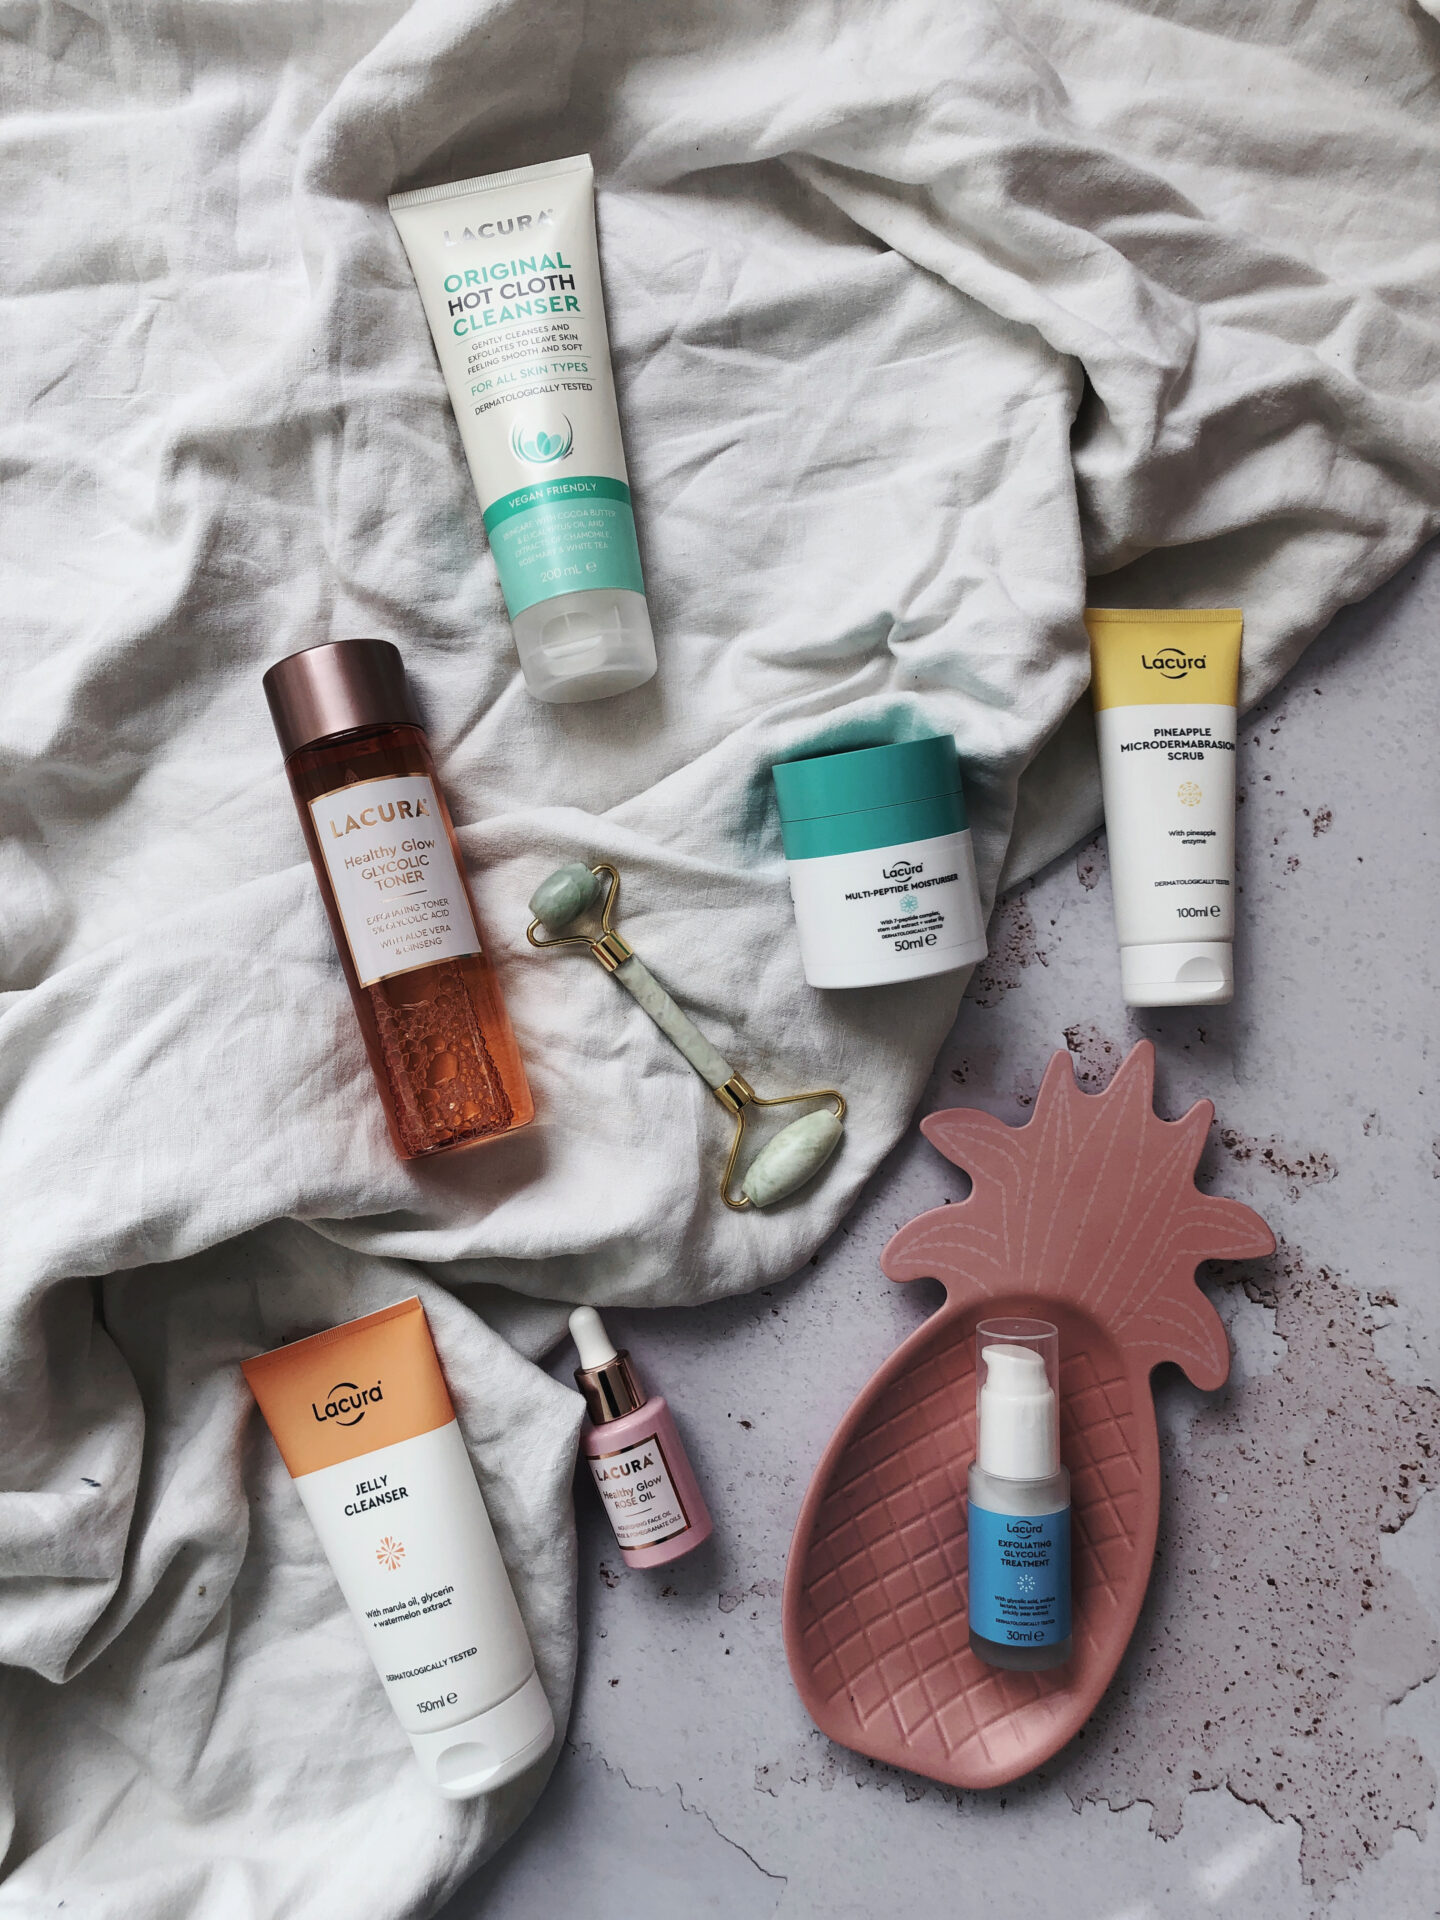 Flatlay of Vegan Skincare Aldi products on a light background